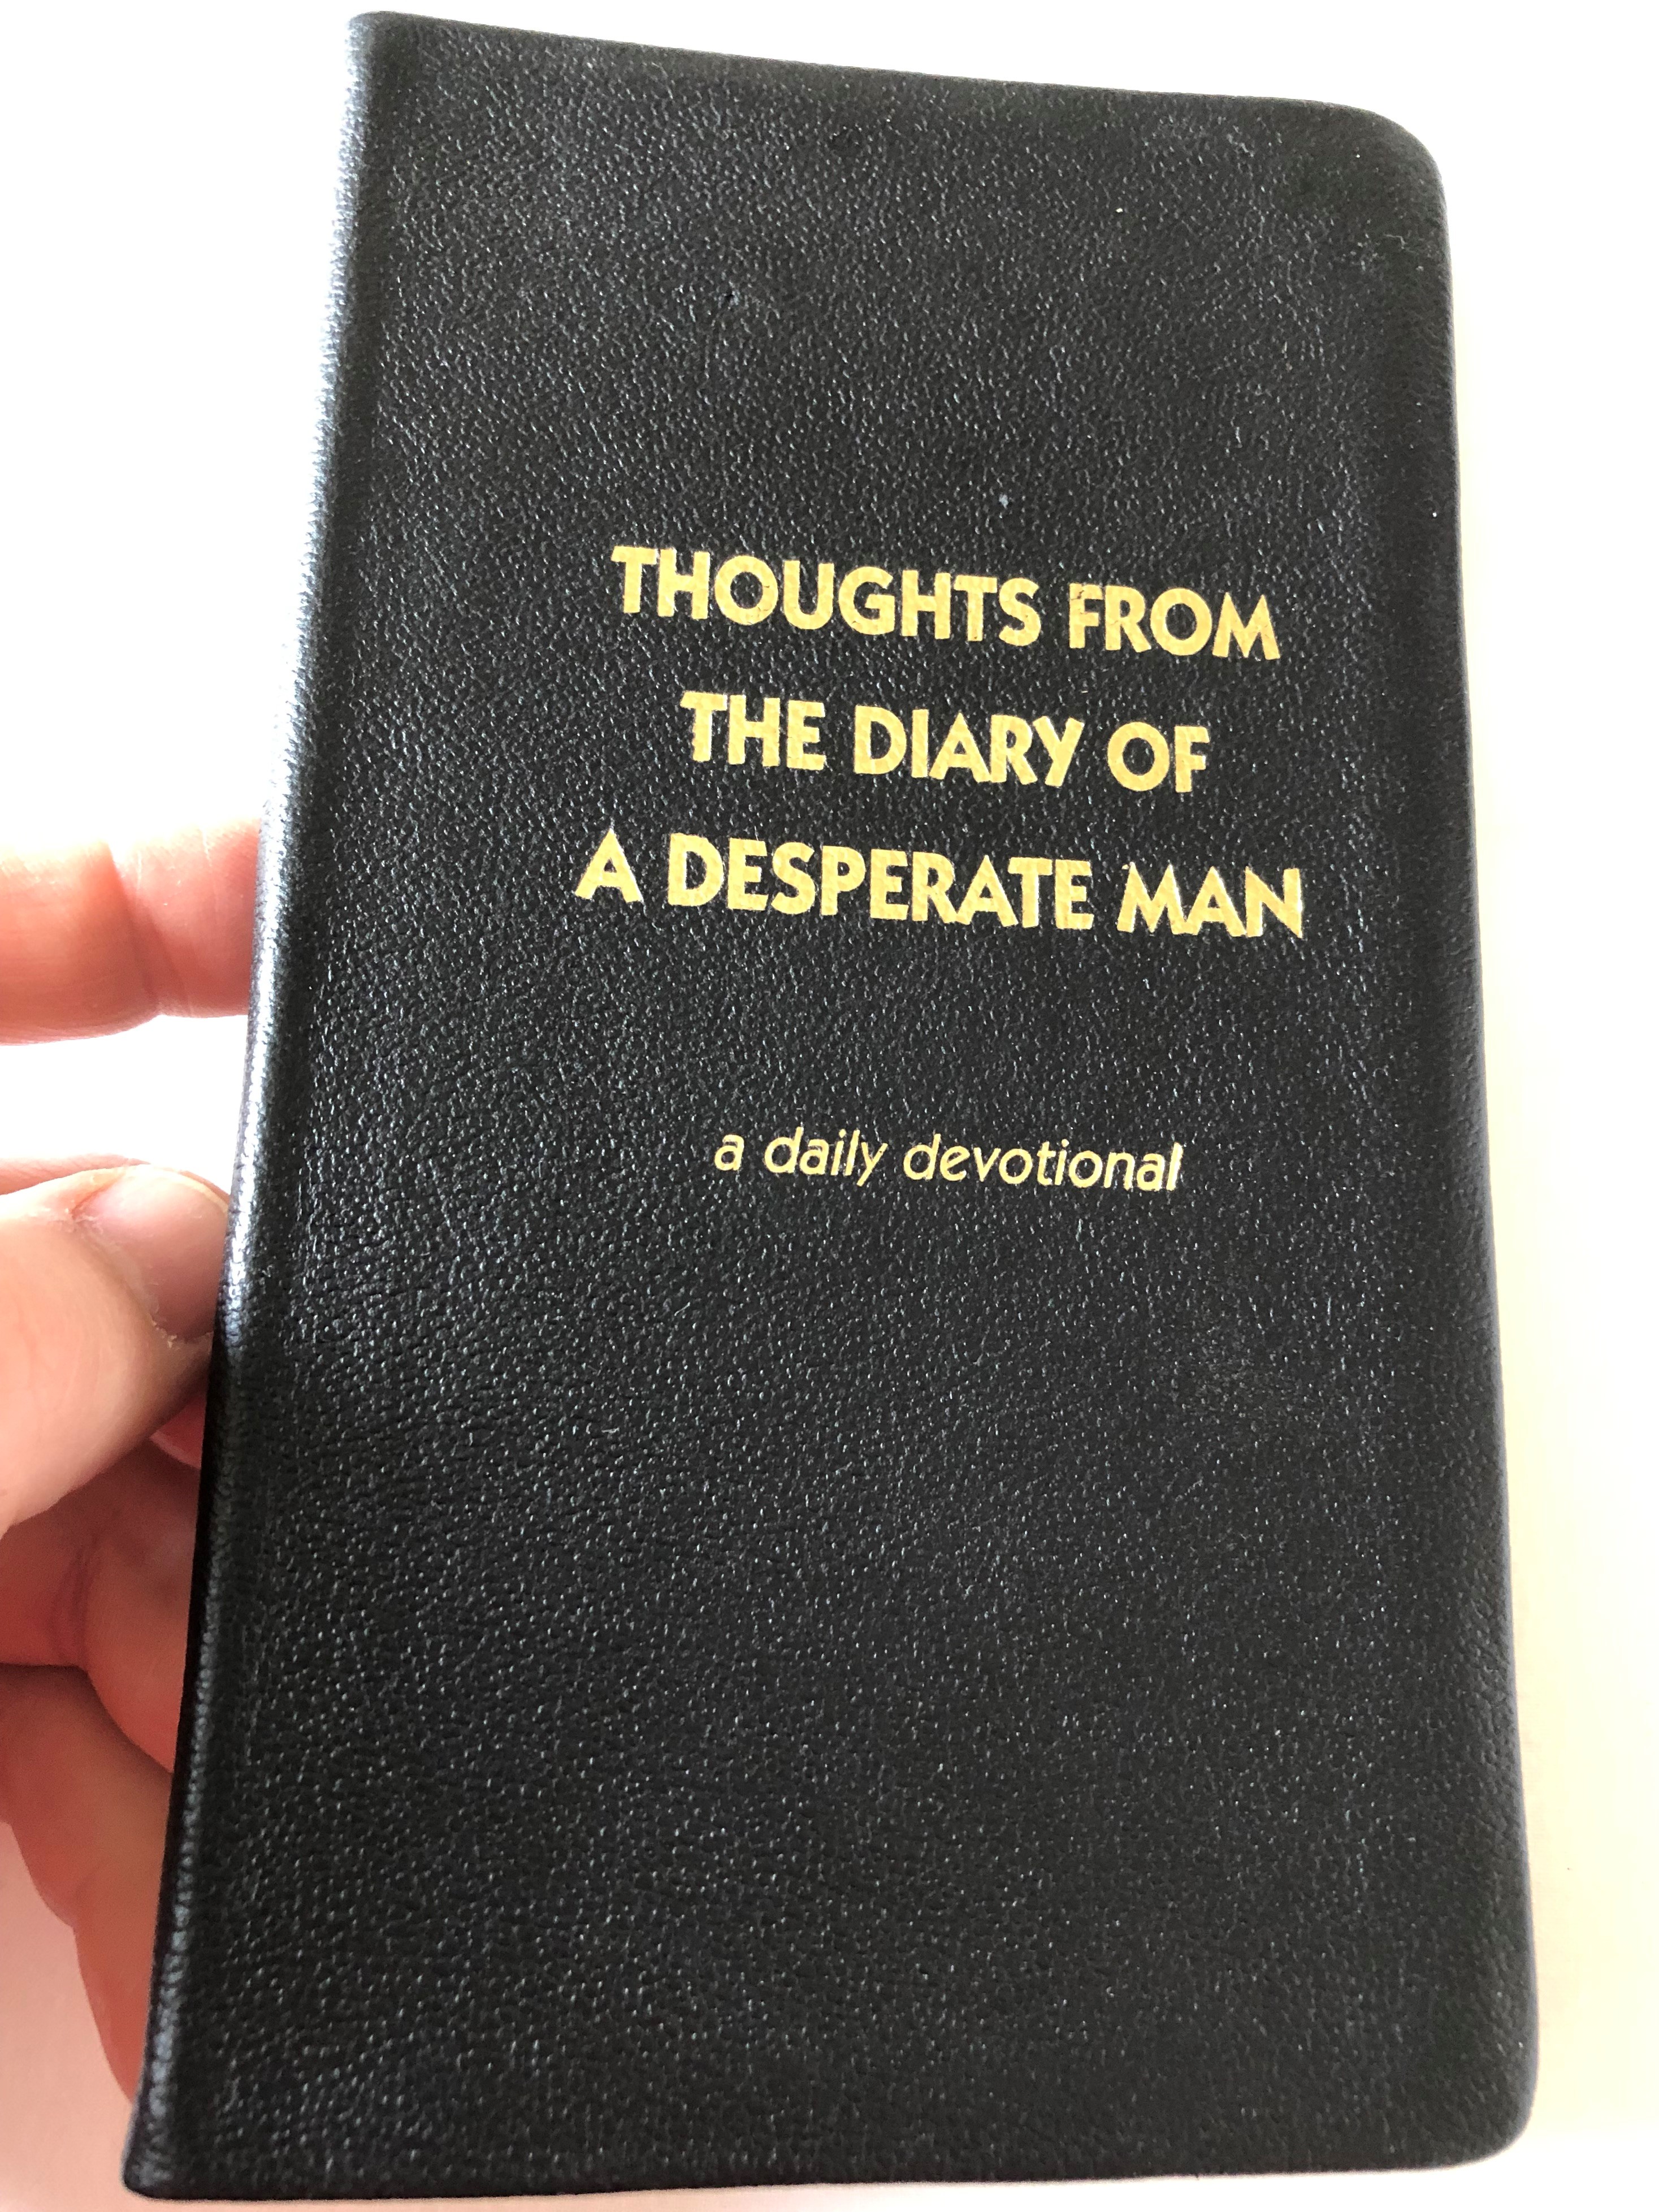 thoughts-from-the-diary-of-a-desperate-man-a-daily-devotional-by-walter-a.-henrichsen-11th-edition-leadership-foundation-golden-edges-leatherbound-black-2010-1-.jpg